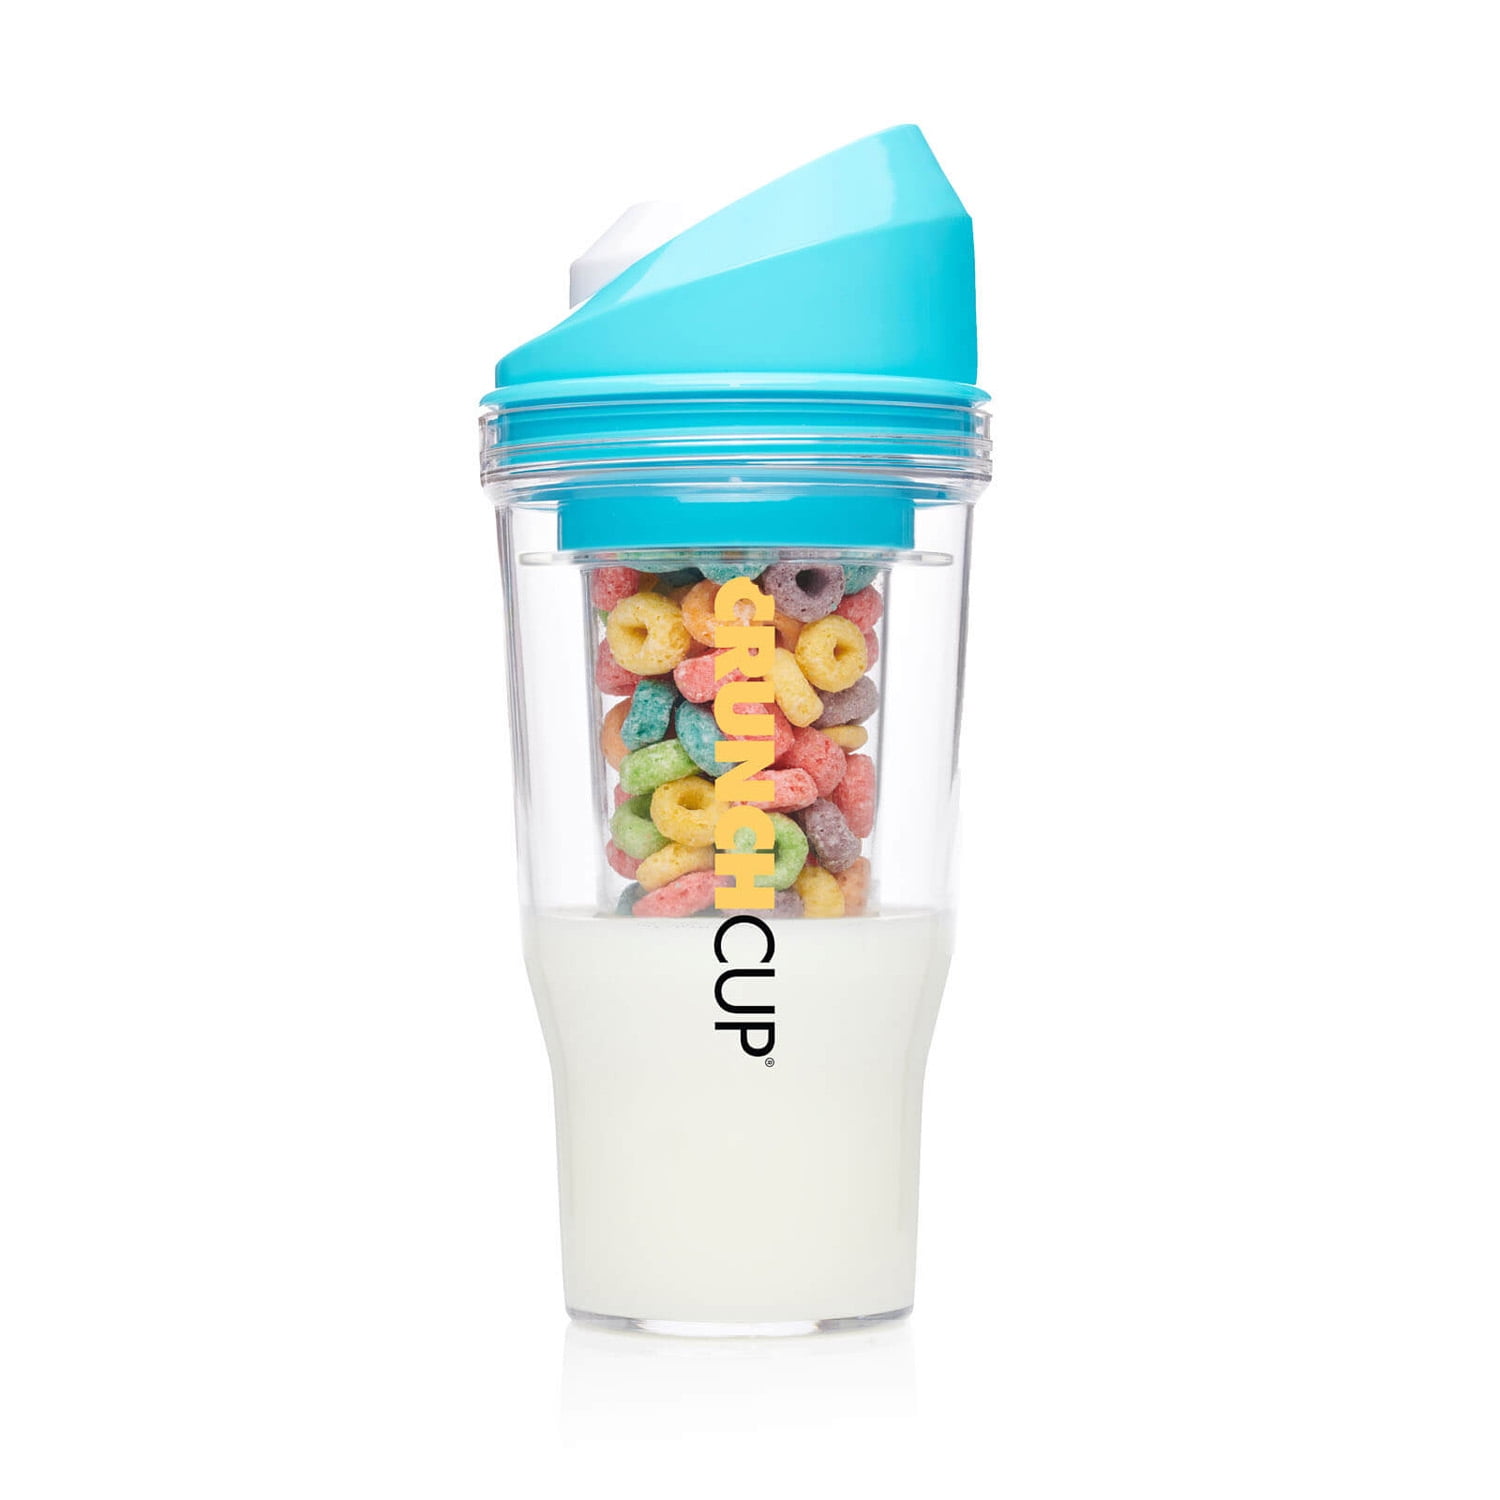 CrunchCup XL Portable Cereal & Milk Cup for Cereal on the Go - BLUE - Brand  New